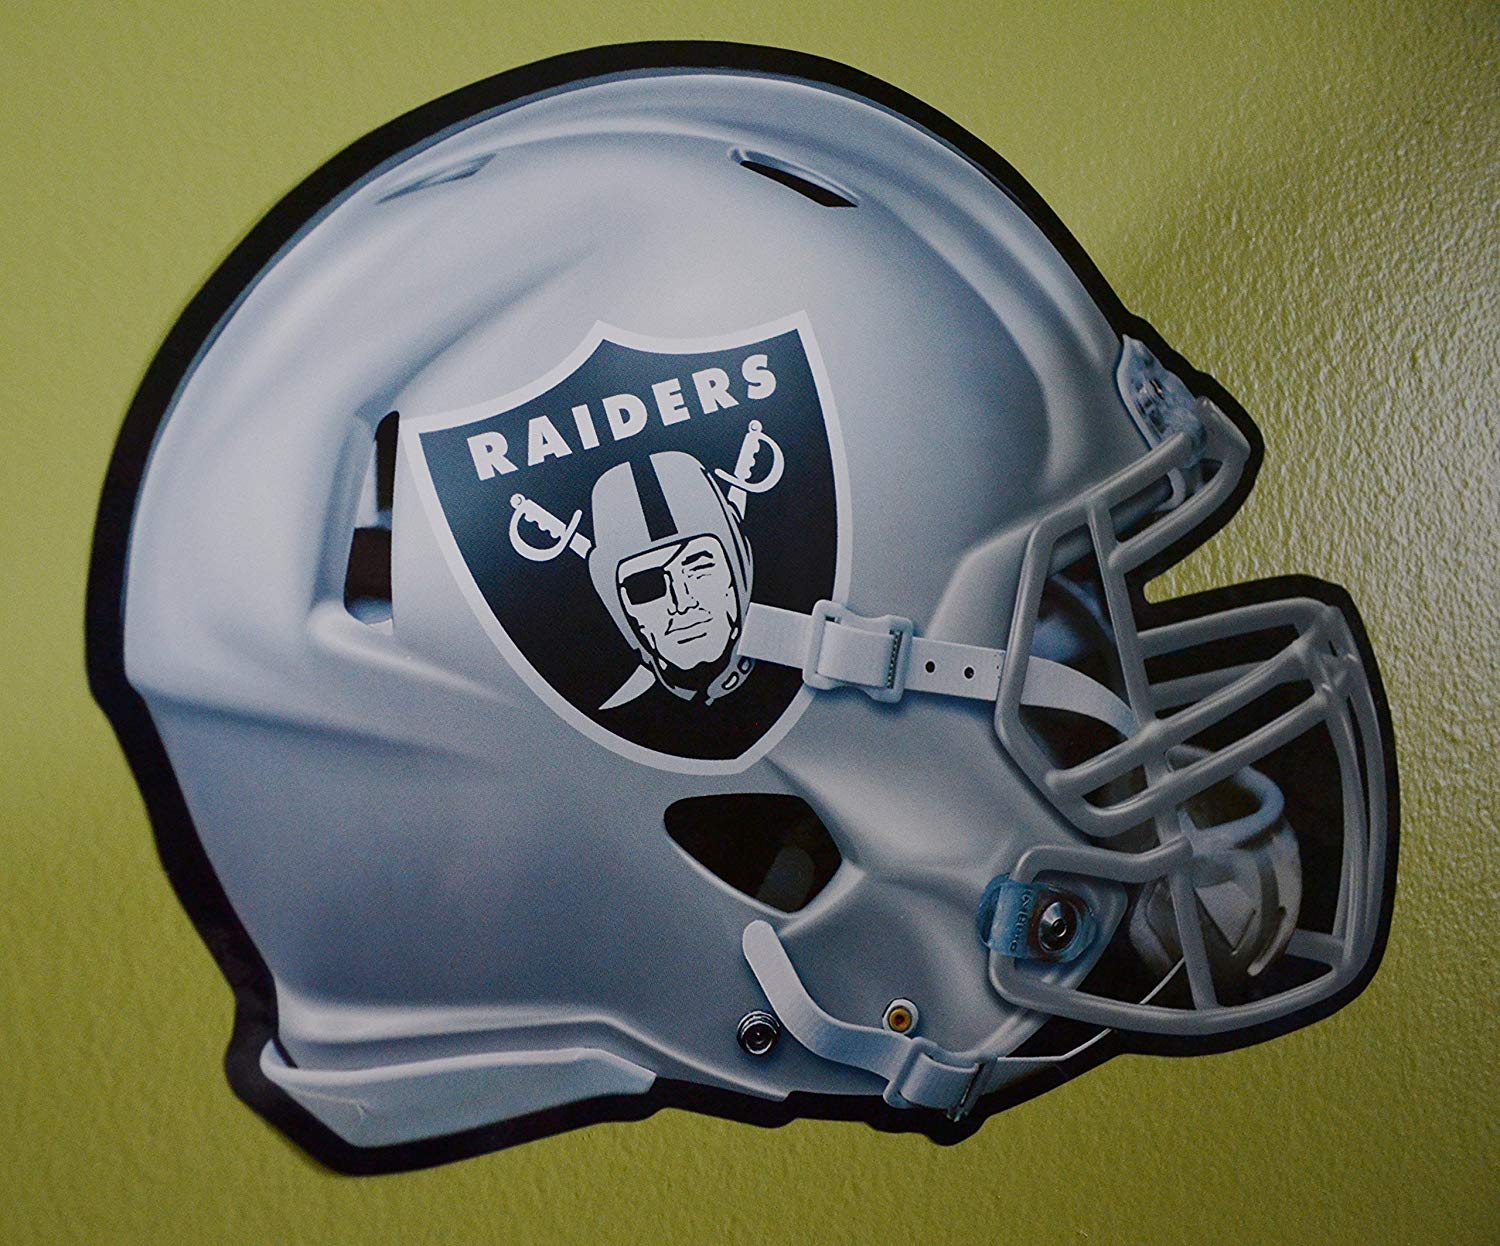 WinCraft Official National Football League Fan Shop Licensed NFL Shop Multi-use Decals (Oakland Raiders)